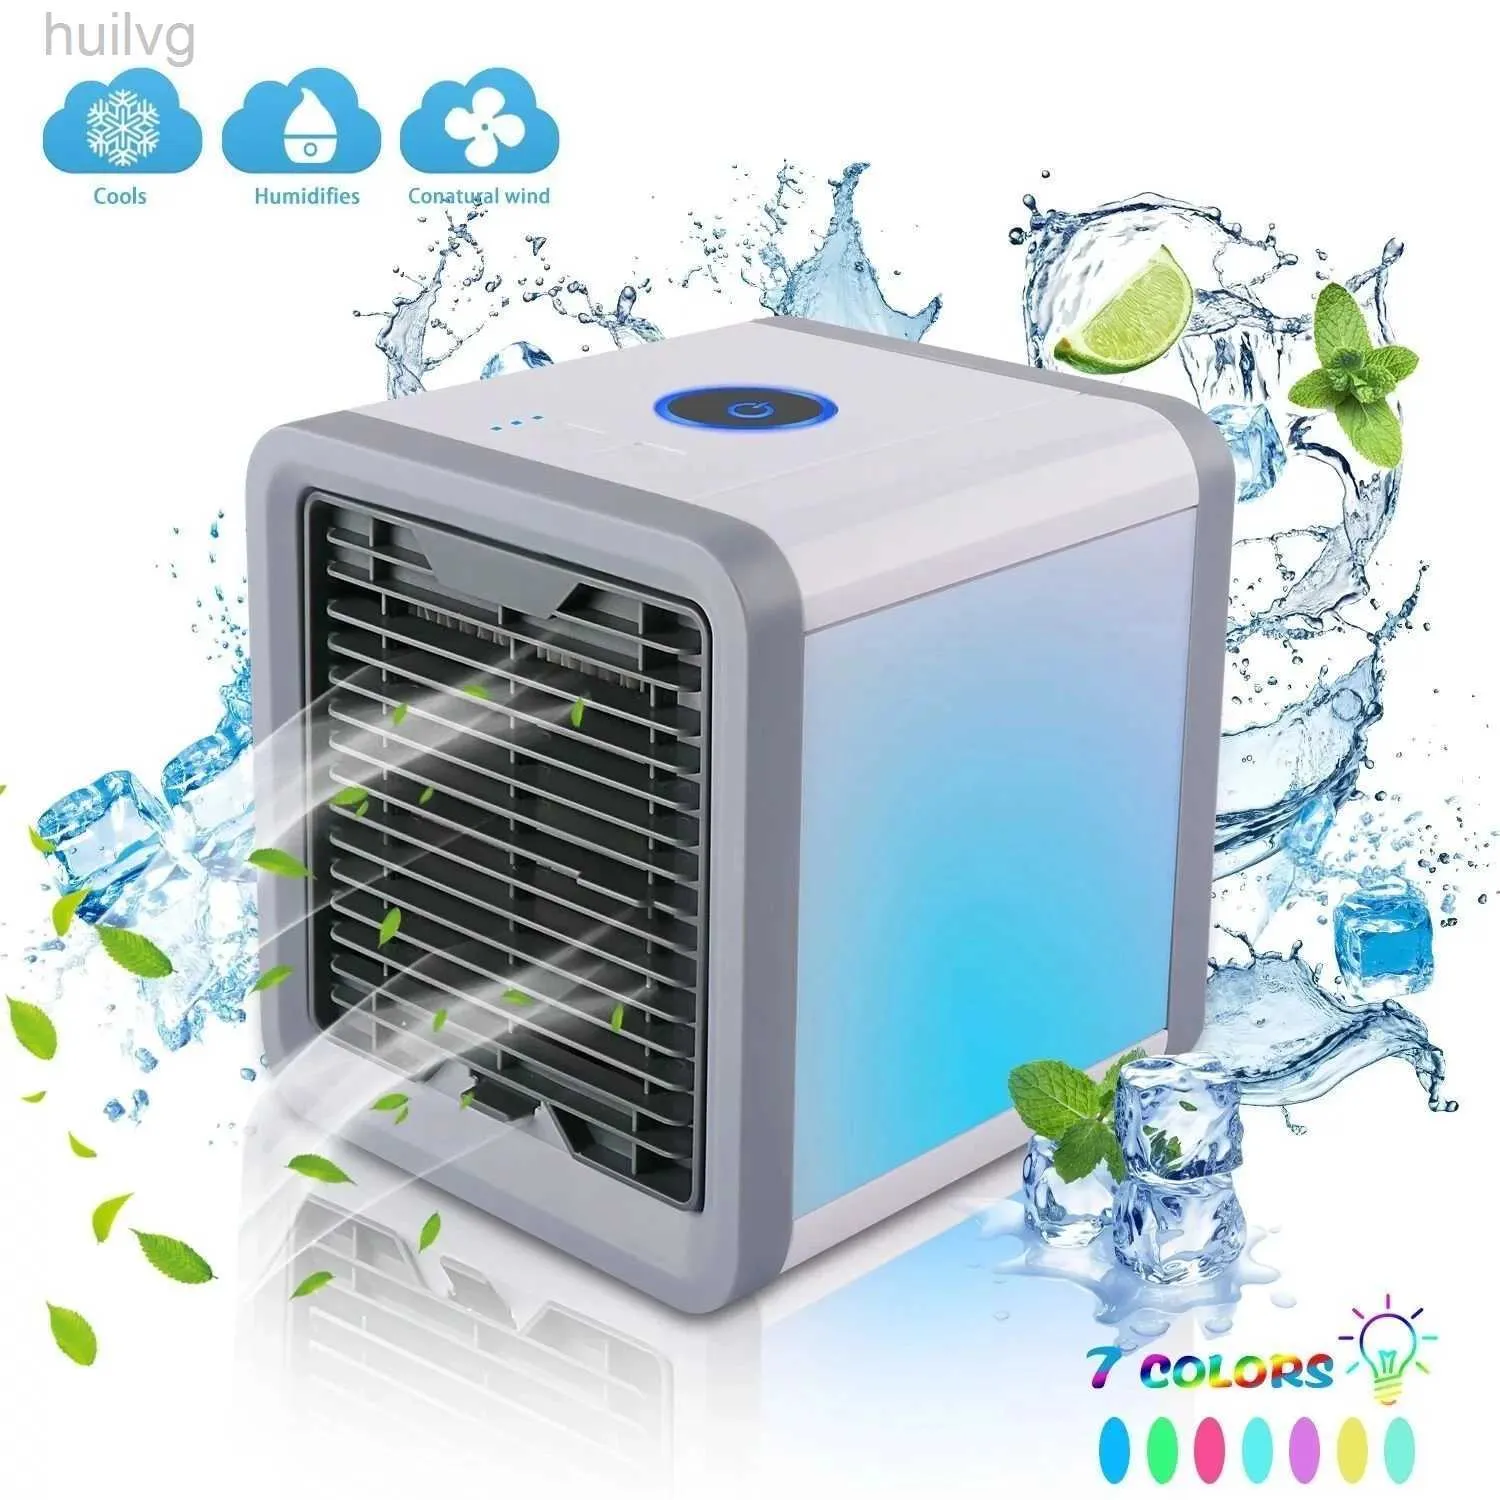 Electric Fans Air Cooler Fan Mini USB Conditioner 7 Colors Light Desktop Cooling Humidifier Purifier For Office Bedroom 240316